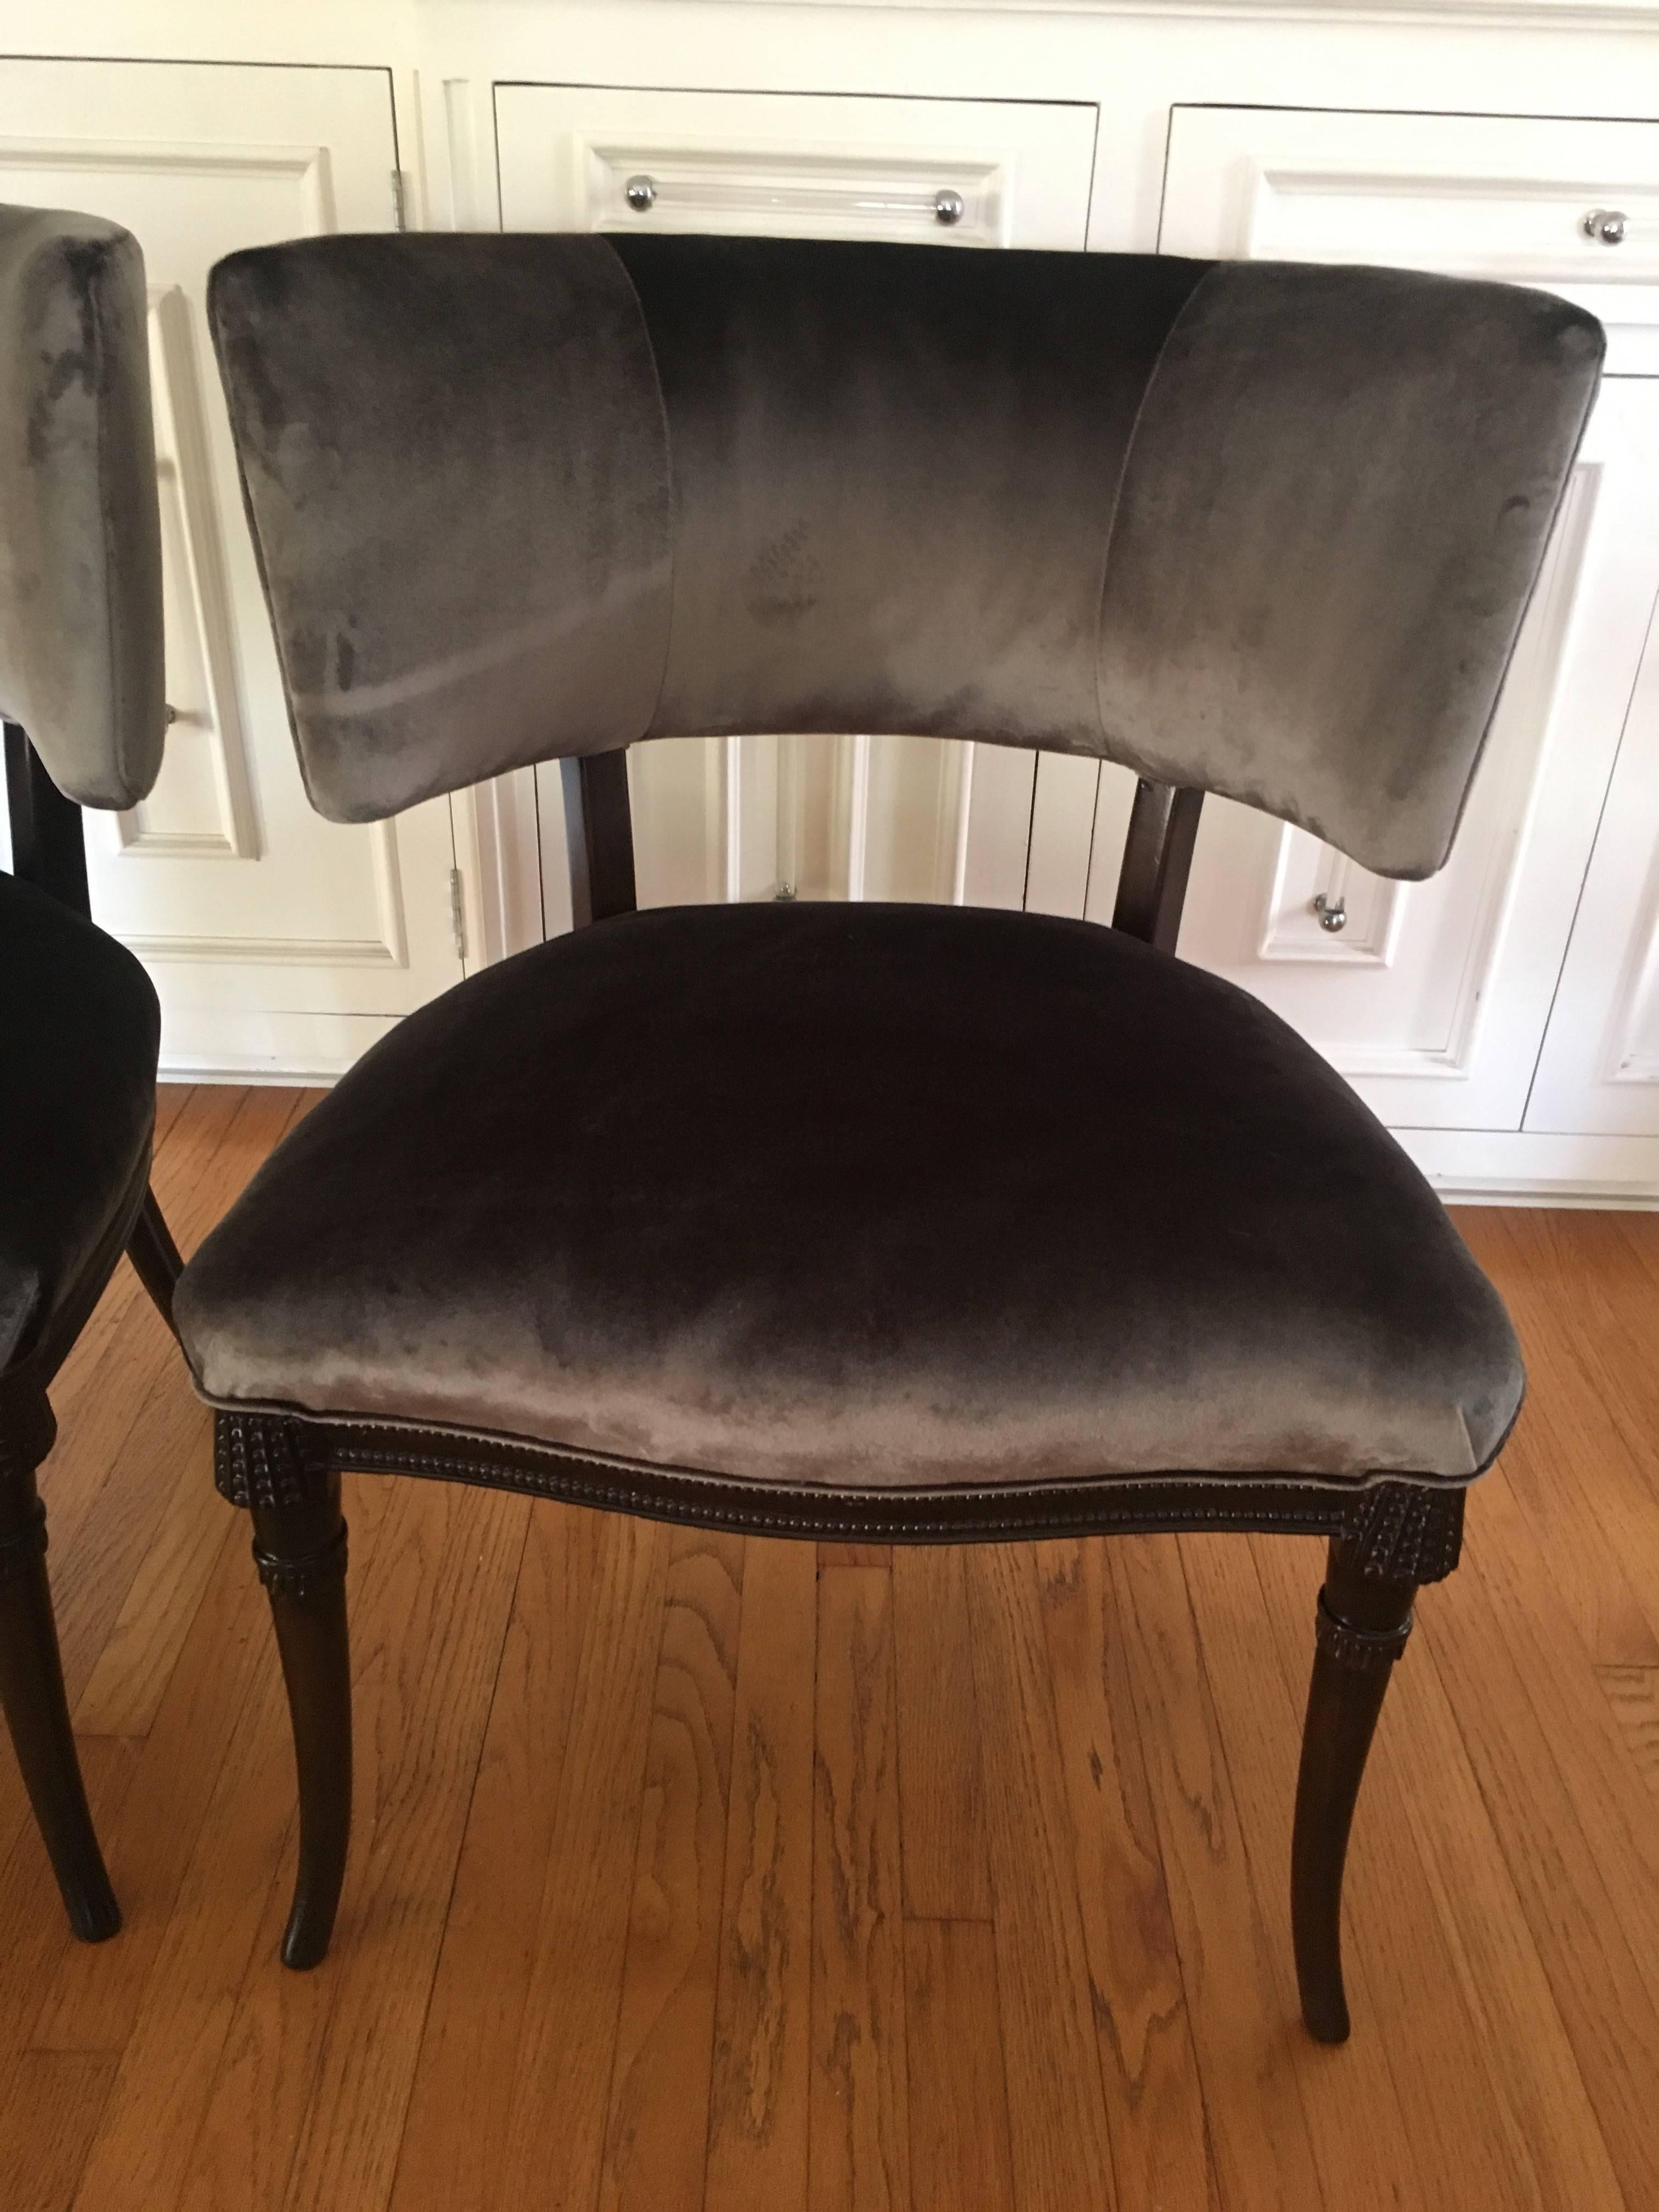 Completely refinished and upholstered Grosfeld house chairs done in walnut finish and grey belgian velvet.